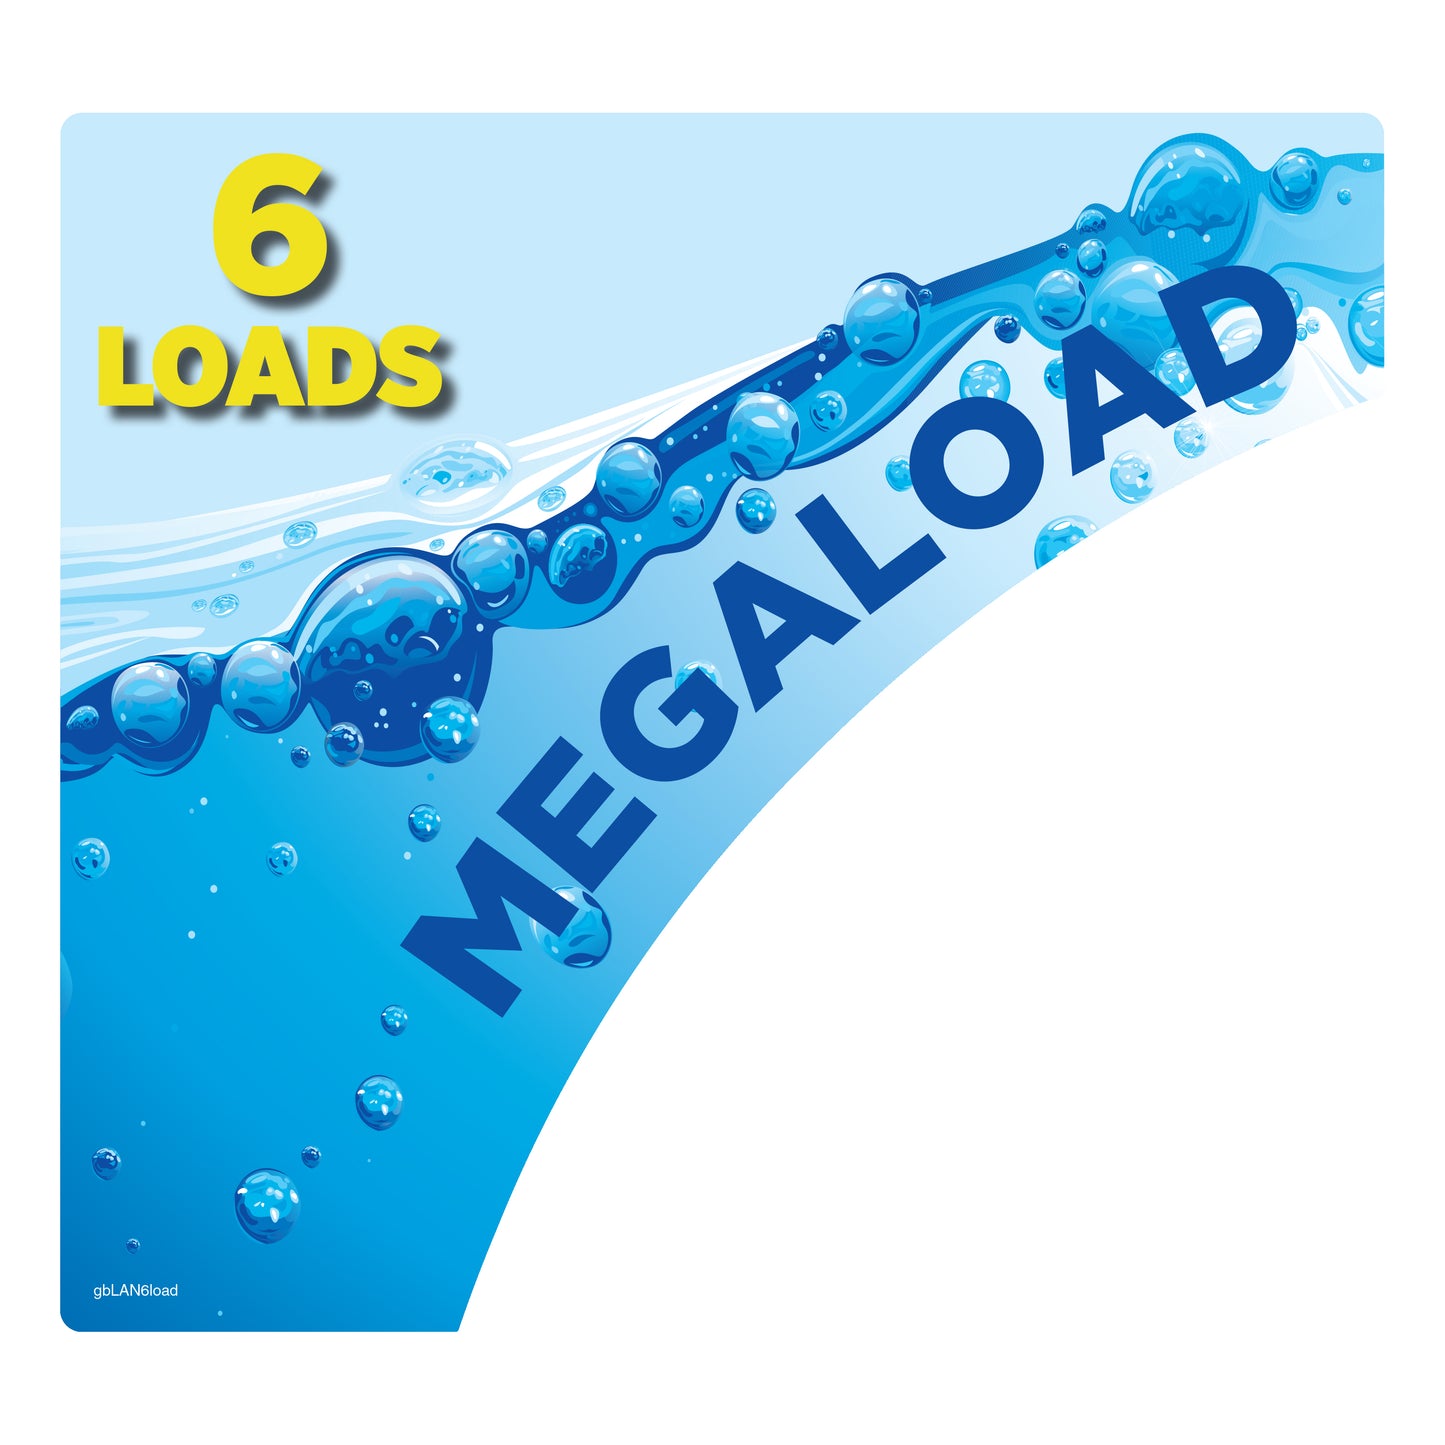 Decal for placement on washing machines at Laundromat displaying Megaload - 6 Loads in size.